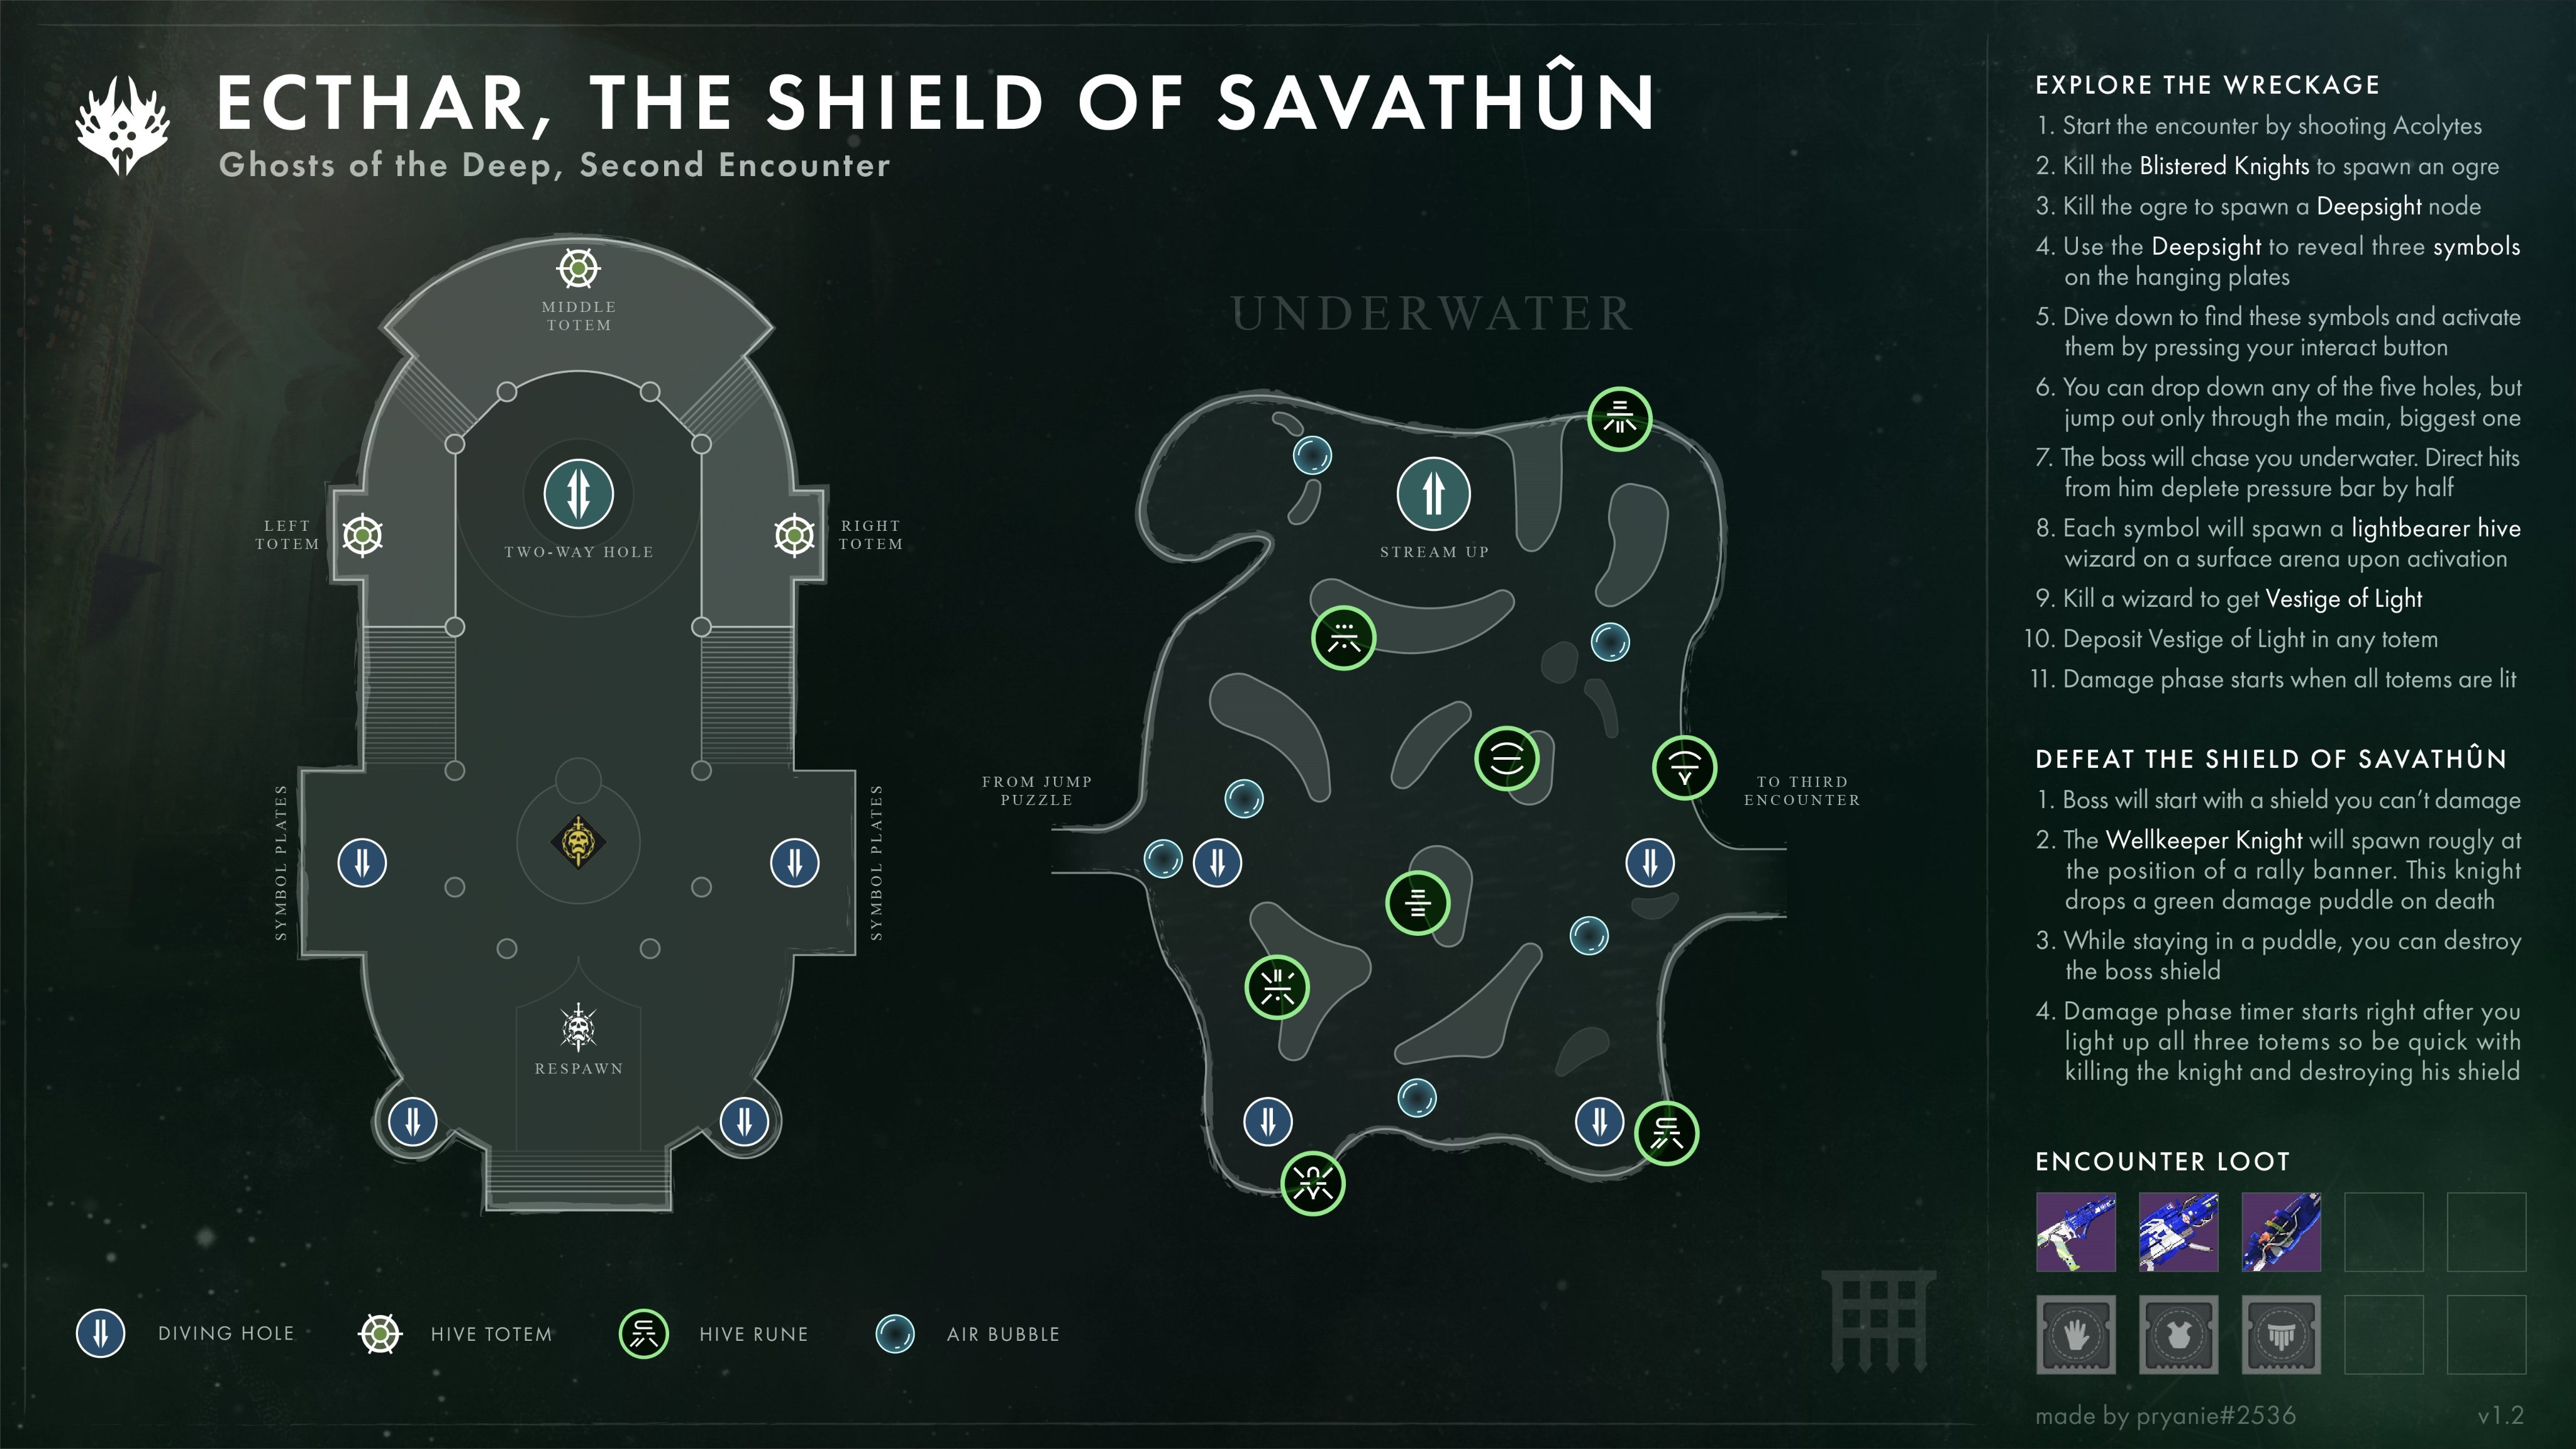 Destiny Bulletin on X: RT if you know this map! #Destiny2